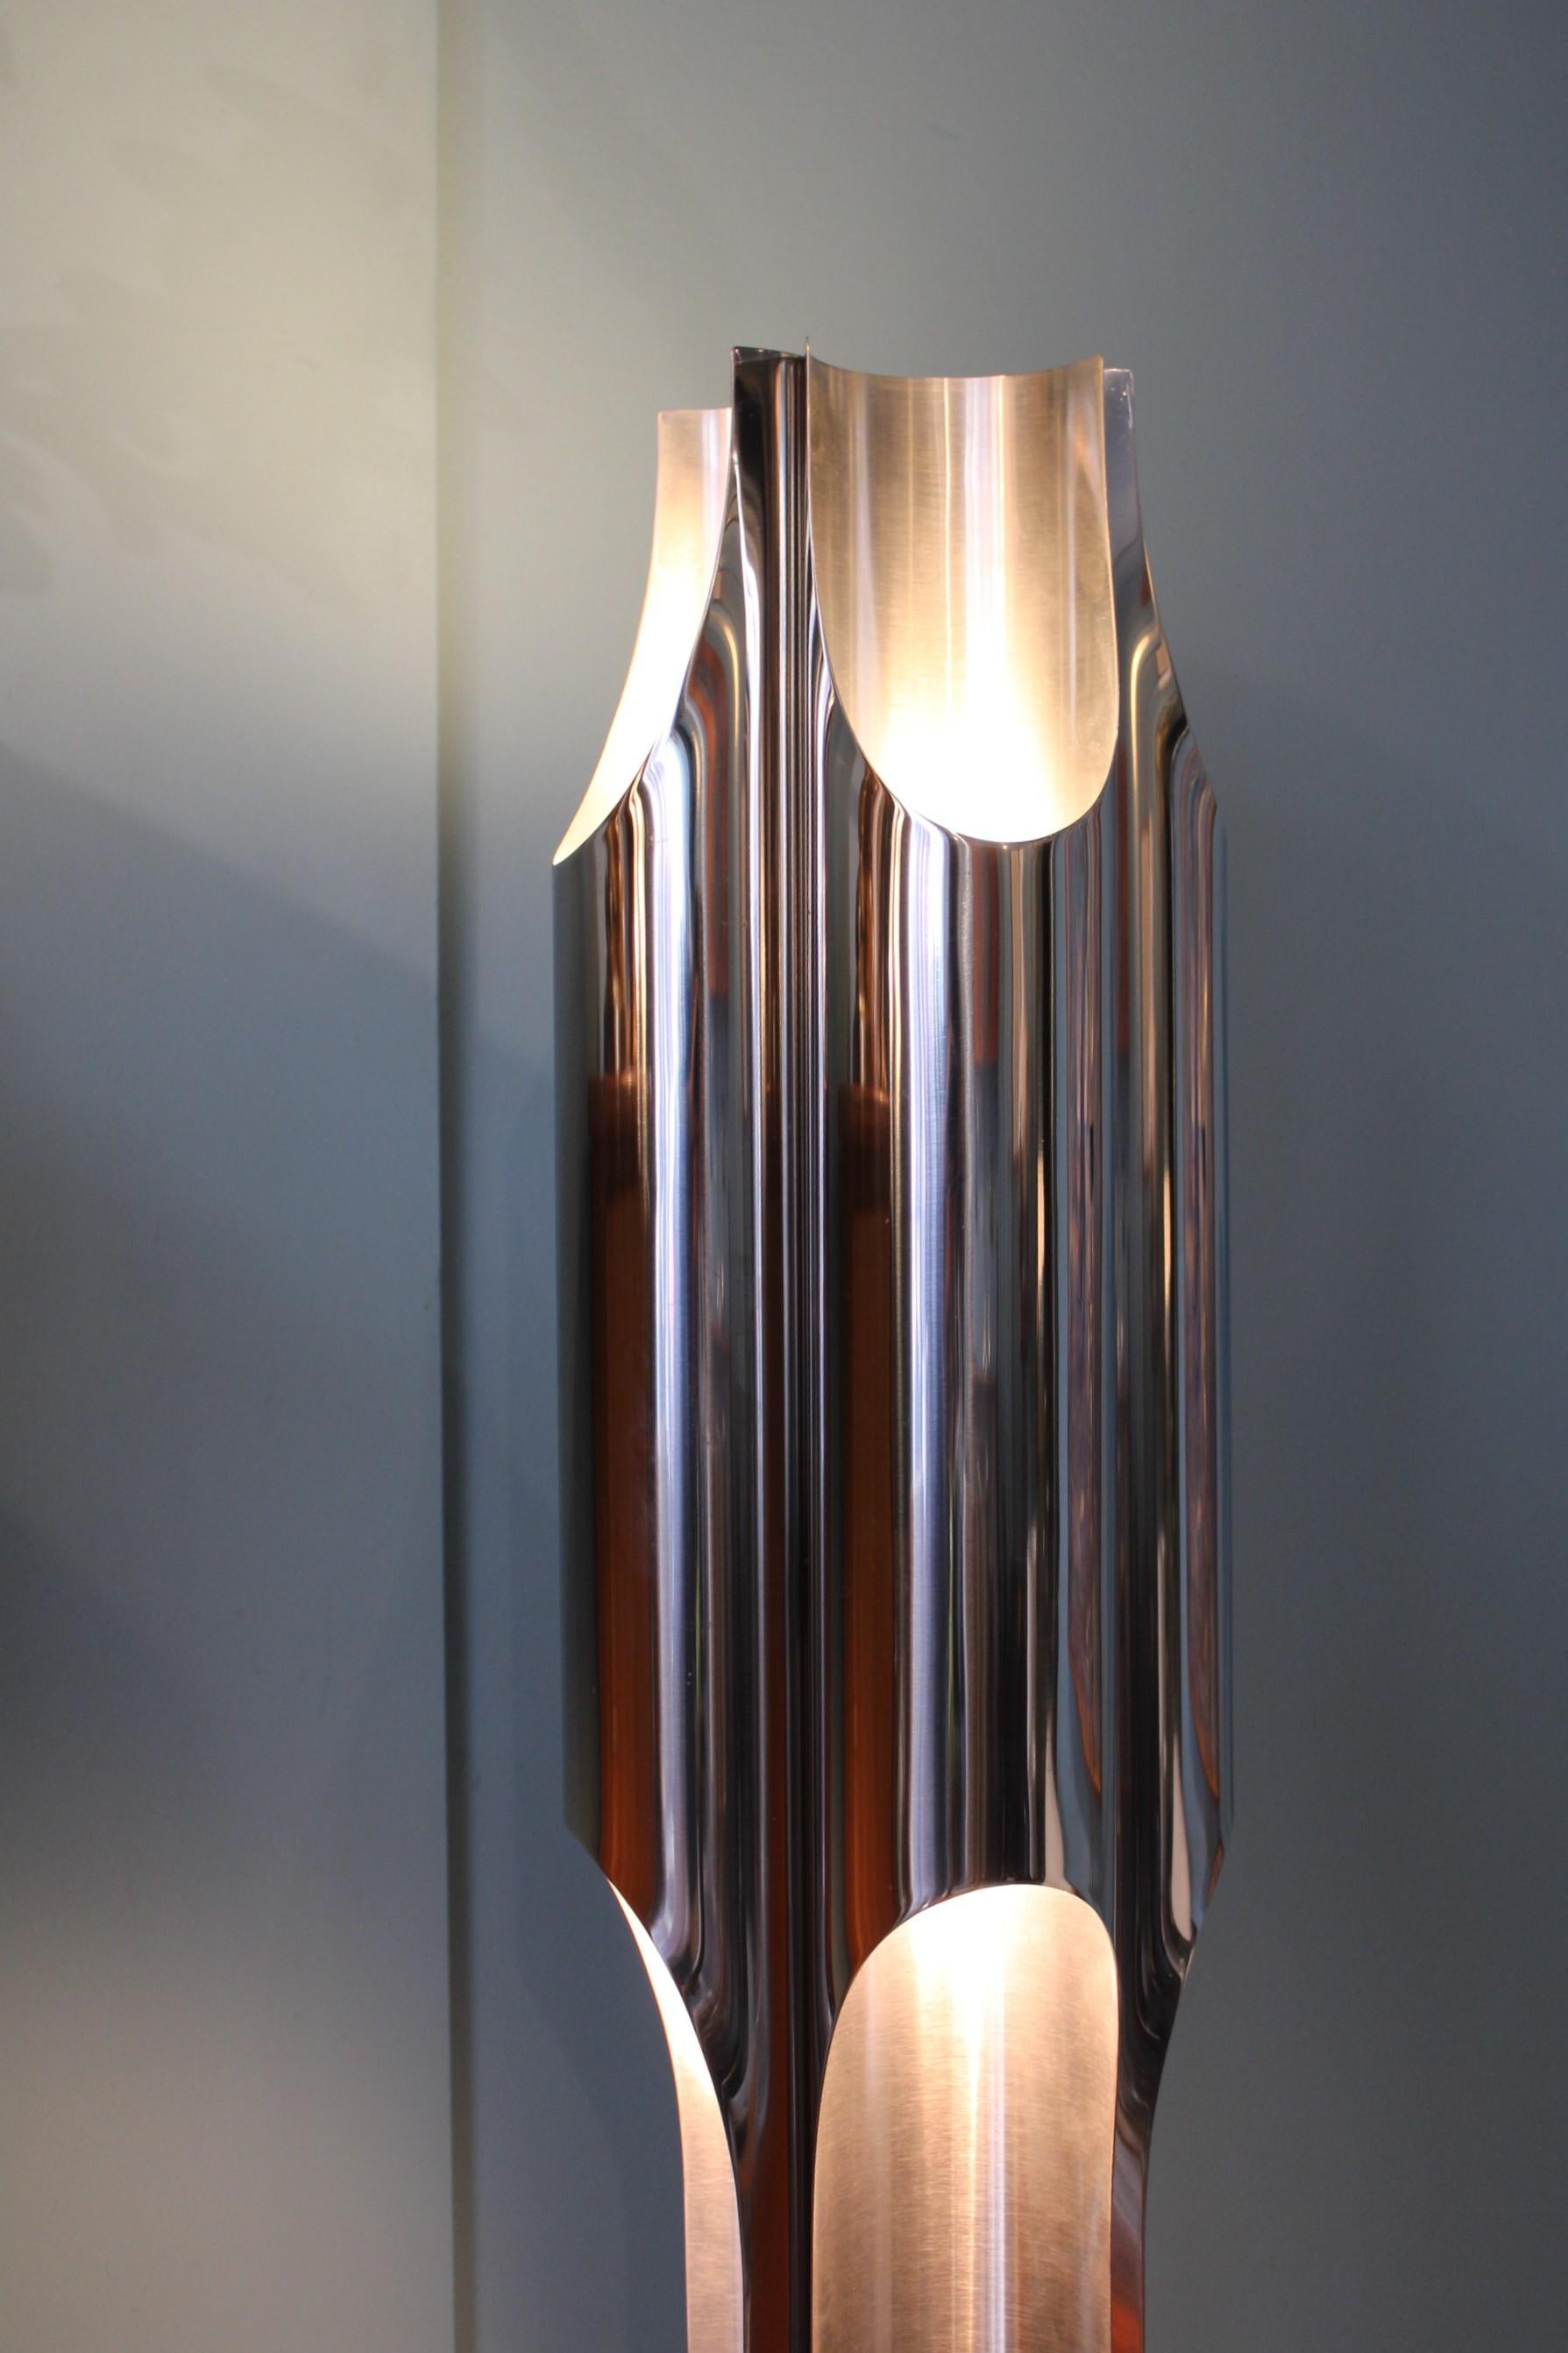 Steel “Orgue” lamp by Maison Charles, France, circa 1970